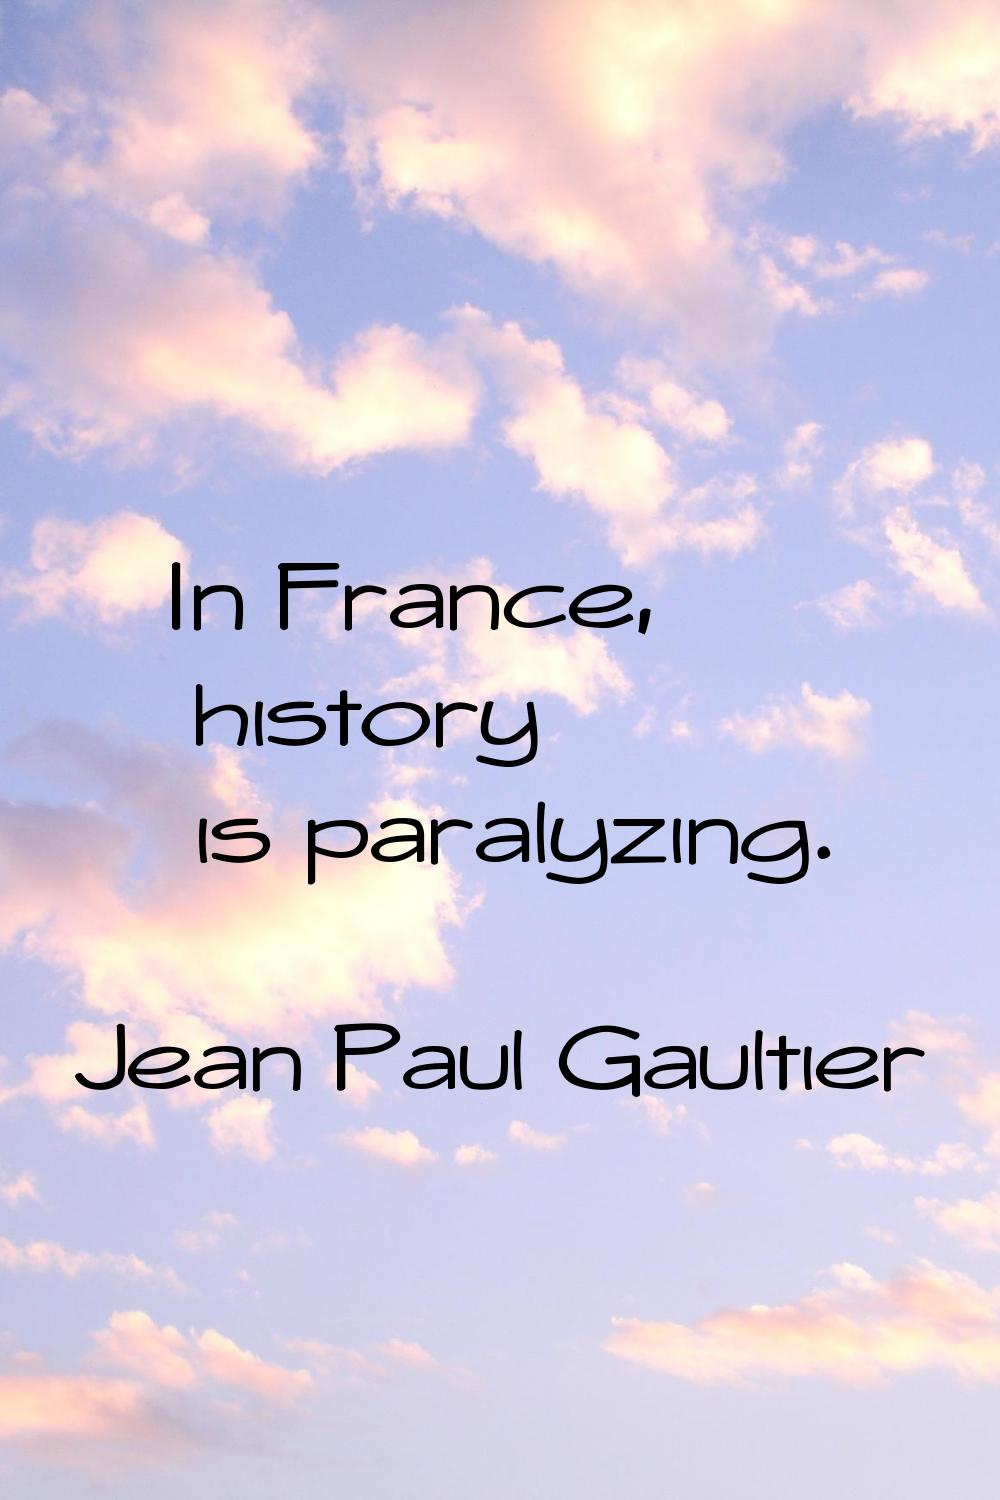 In France, history is paralyzing.